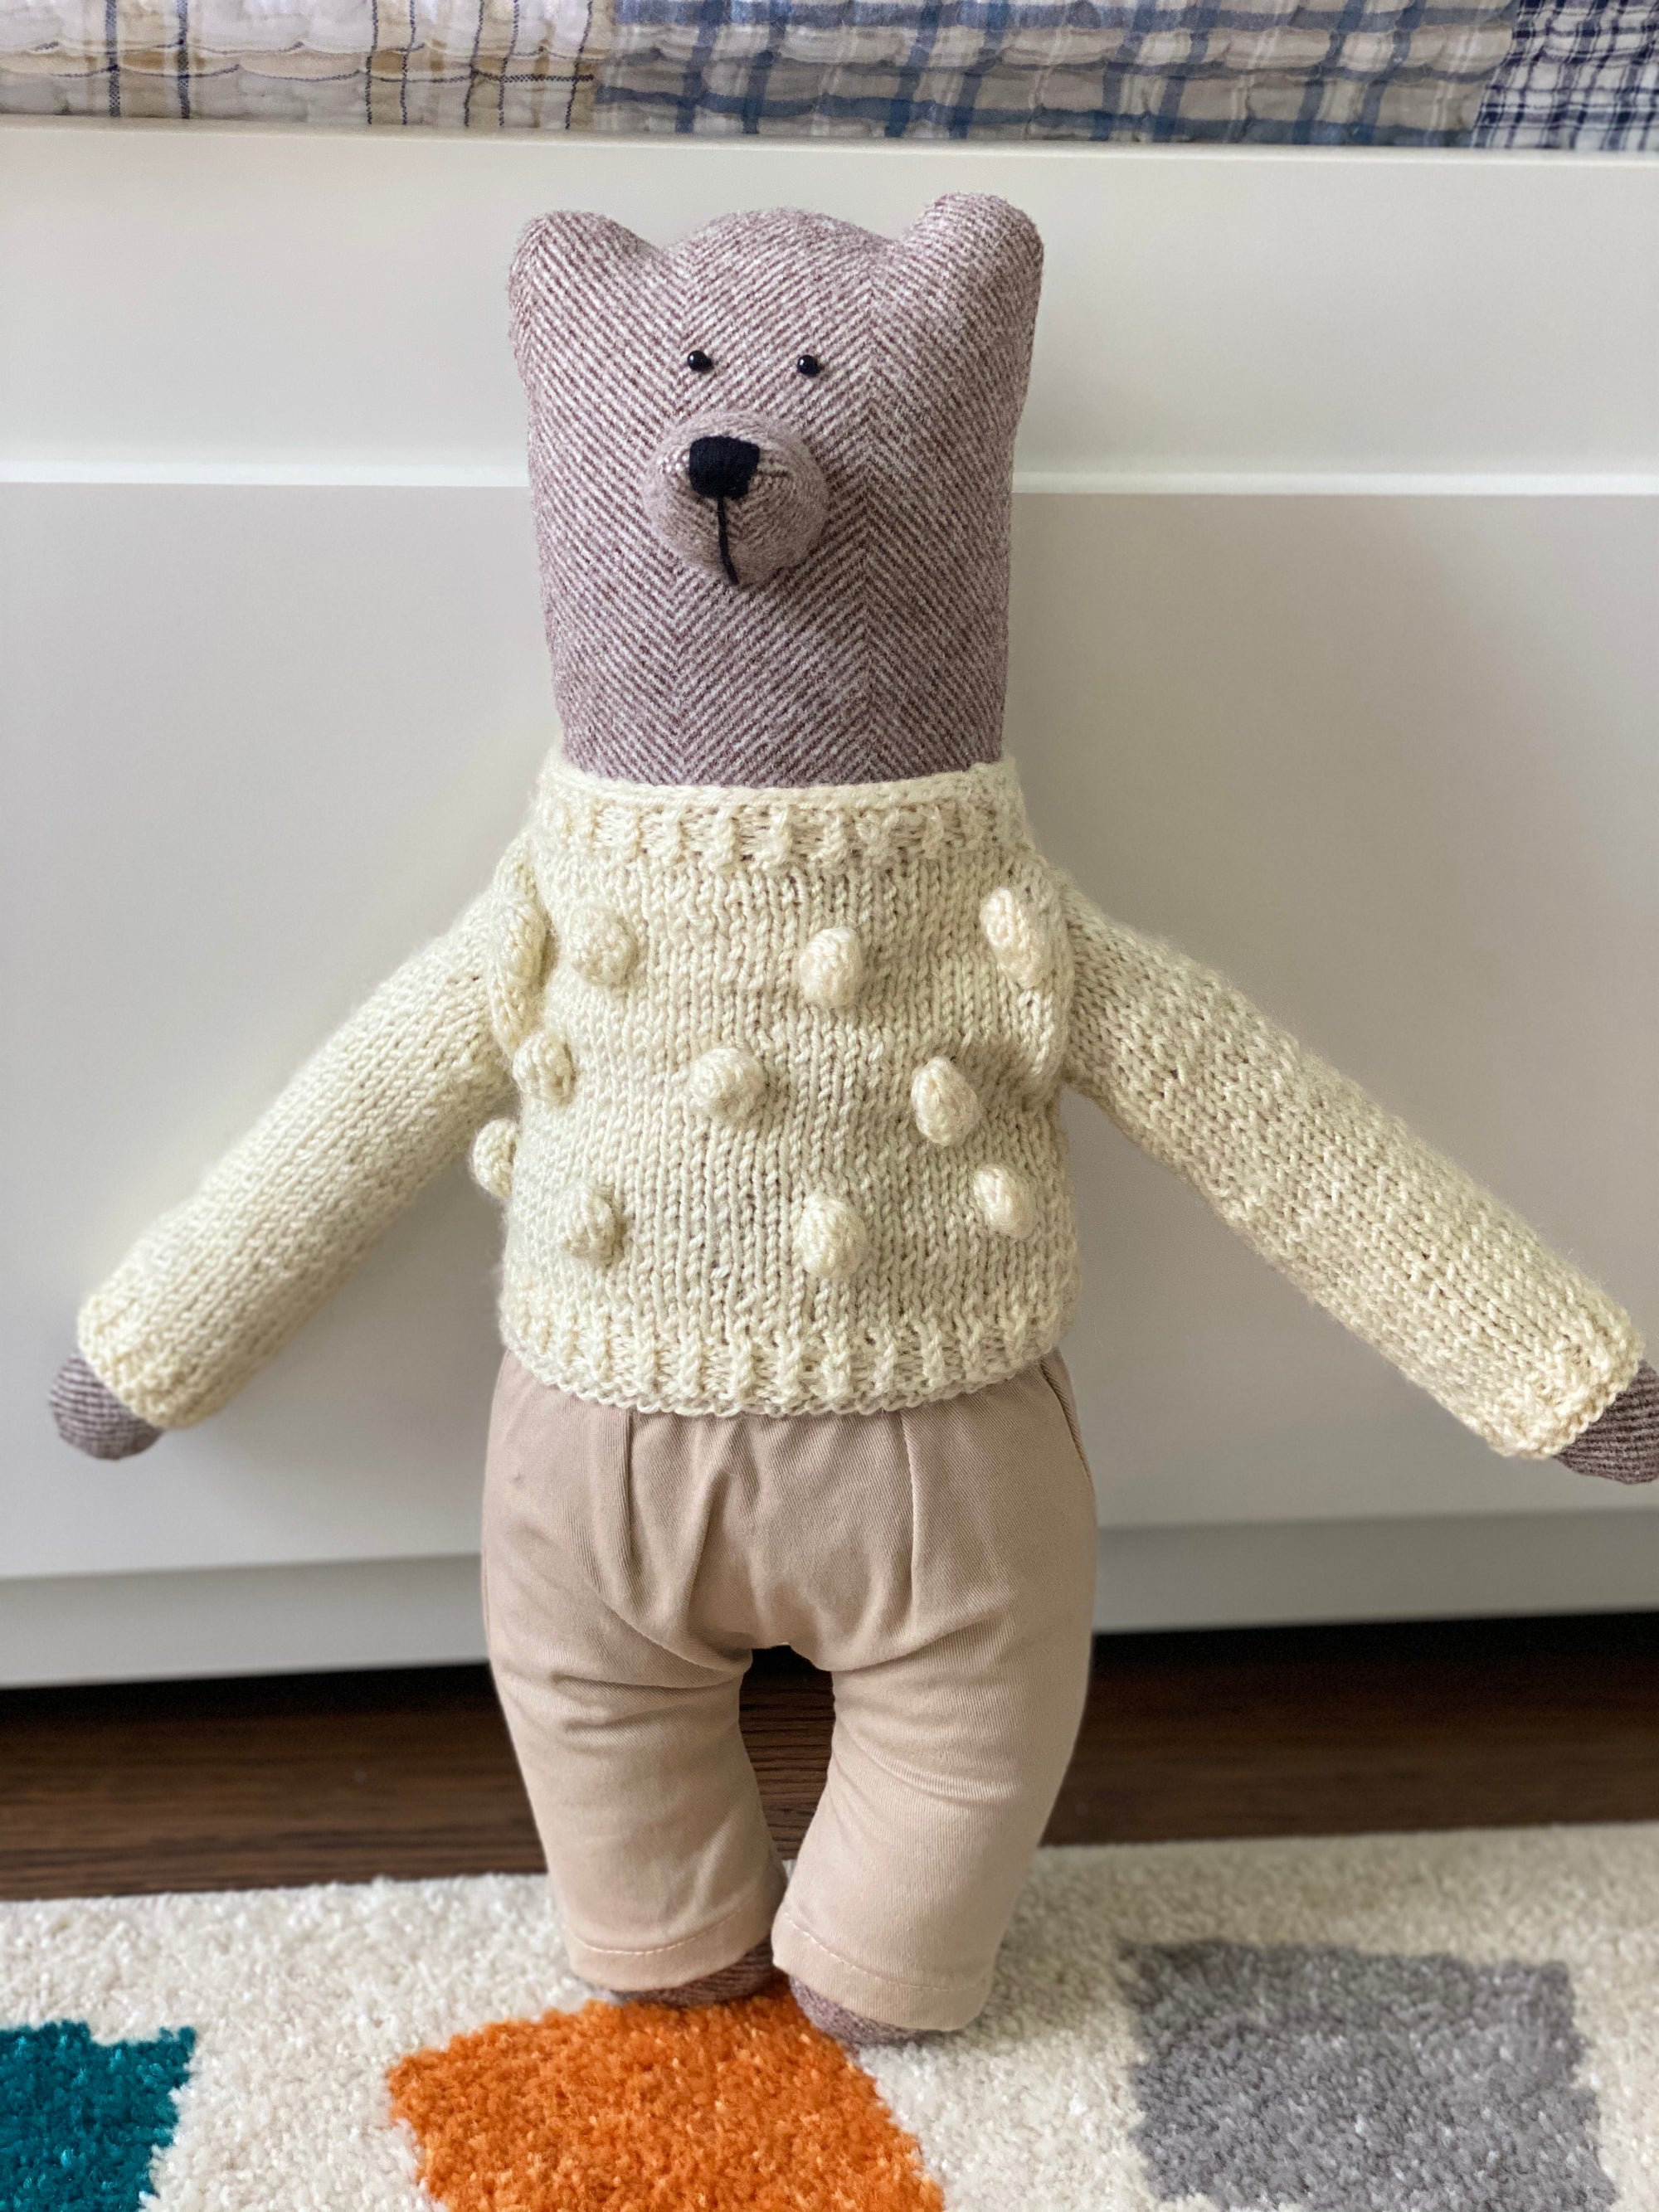 Hand Knitted Boy or Girl Teddy Bear Sweater Handmade From 100% 